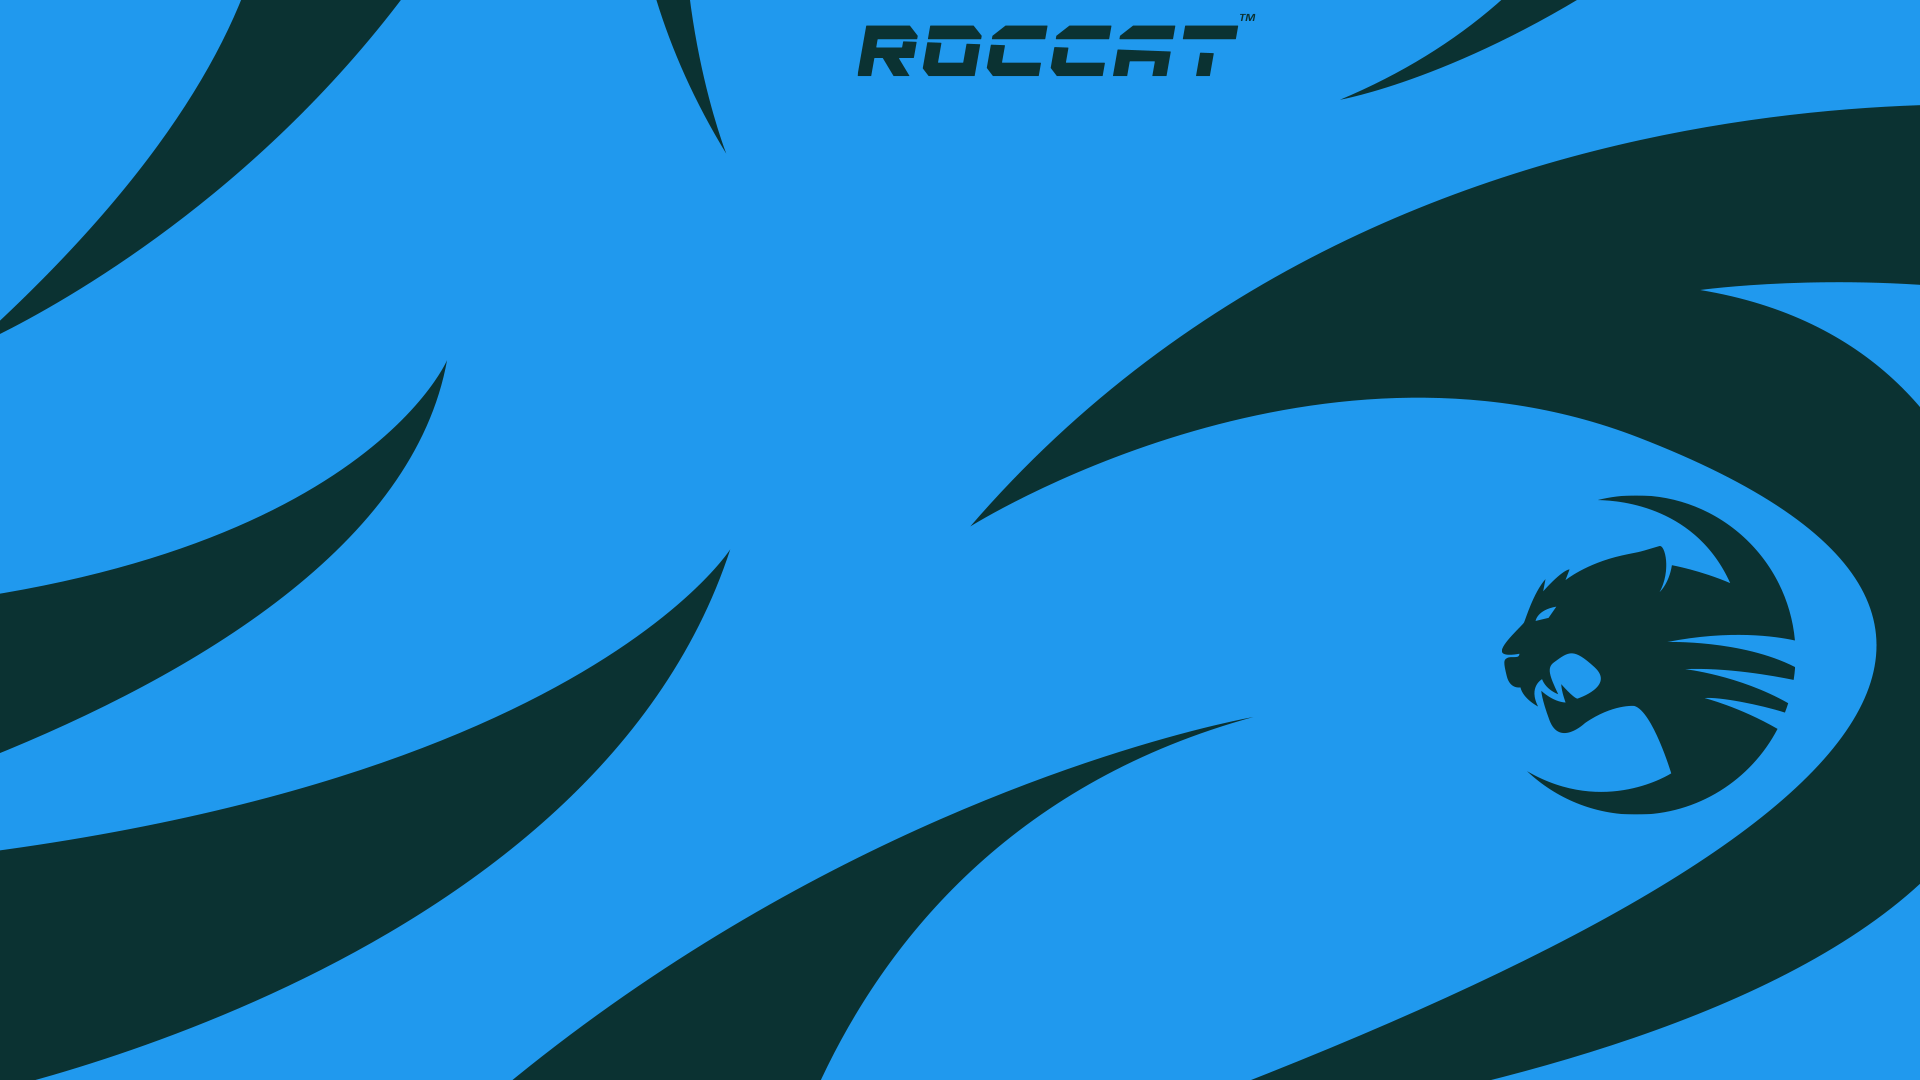 Roccat Wallpaper - Roccat Wallpaper Hd , HD Wallpaper & Backgrounds